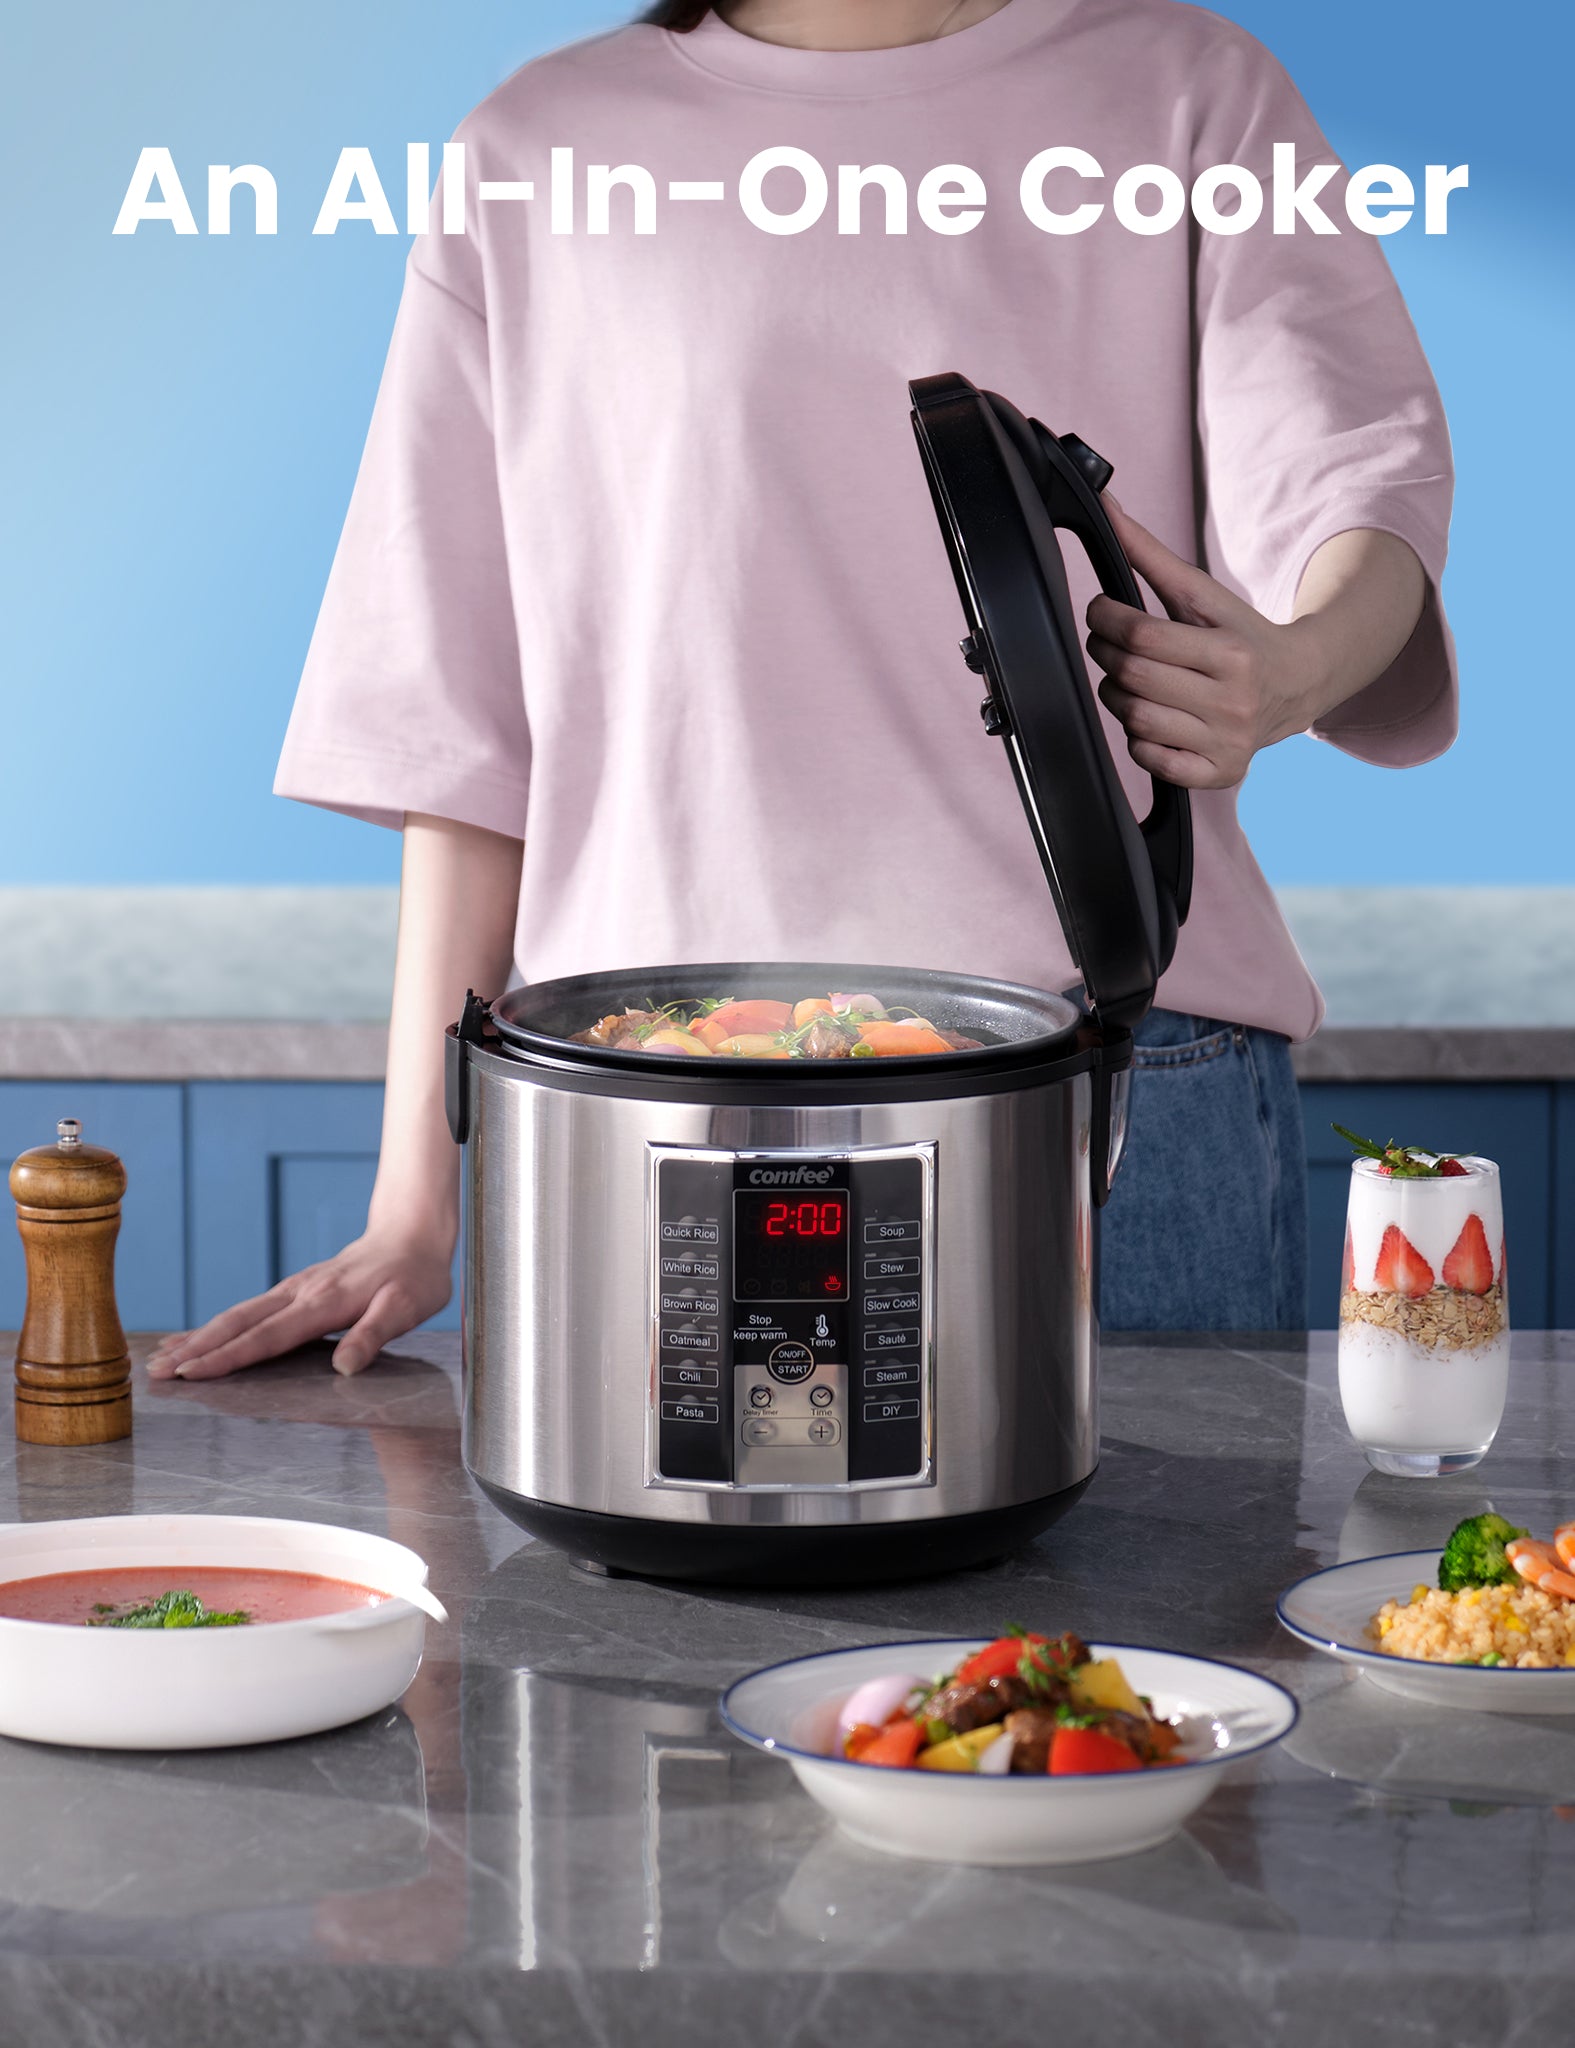  COMFEE' 6 Quart Pressure Cooker 12-in-1, One Touch